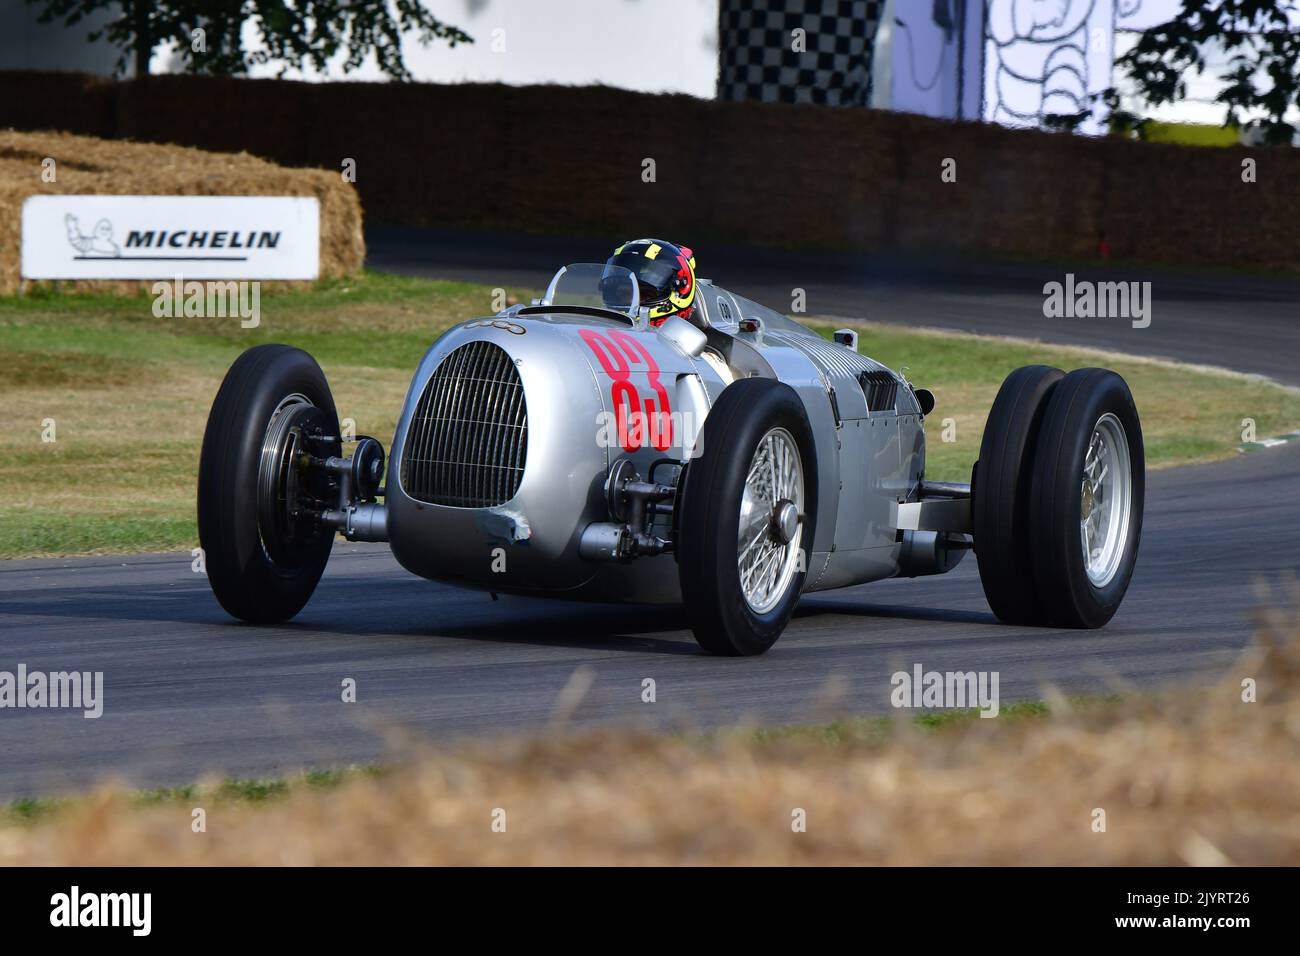 Auto Union Type C, From the early twenties innovative technology of the period such as supercharging greatly increased engine power, this also lead to Stock Photo